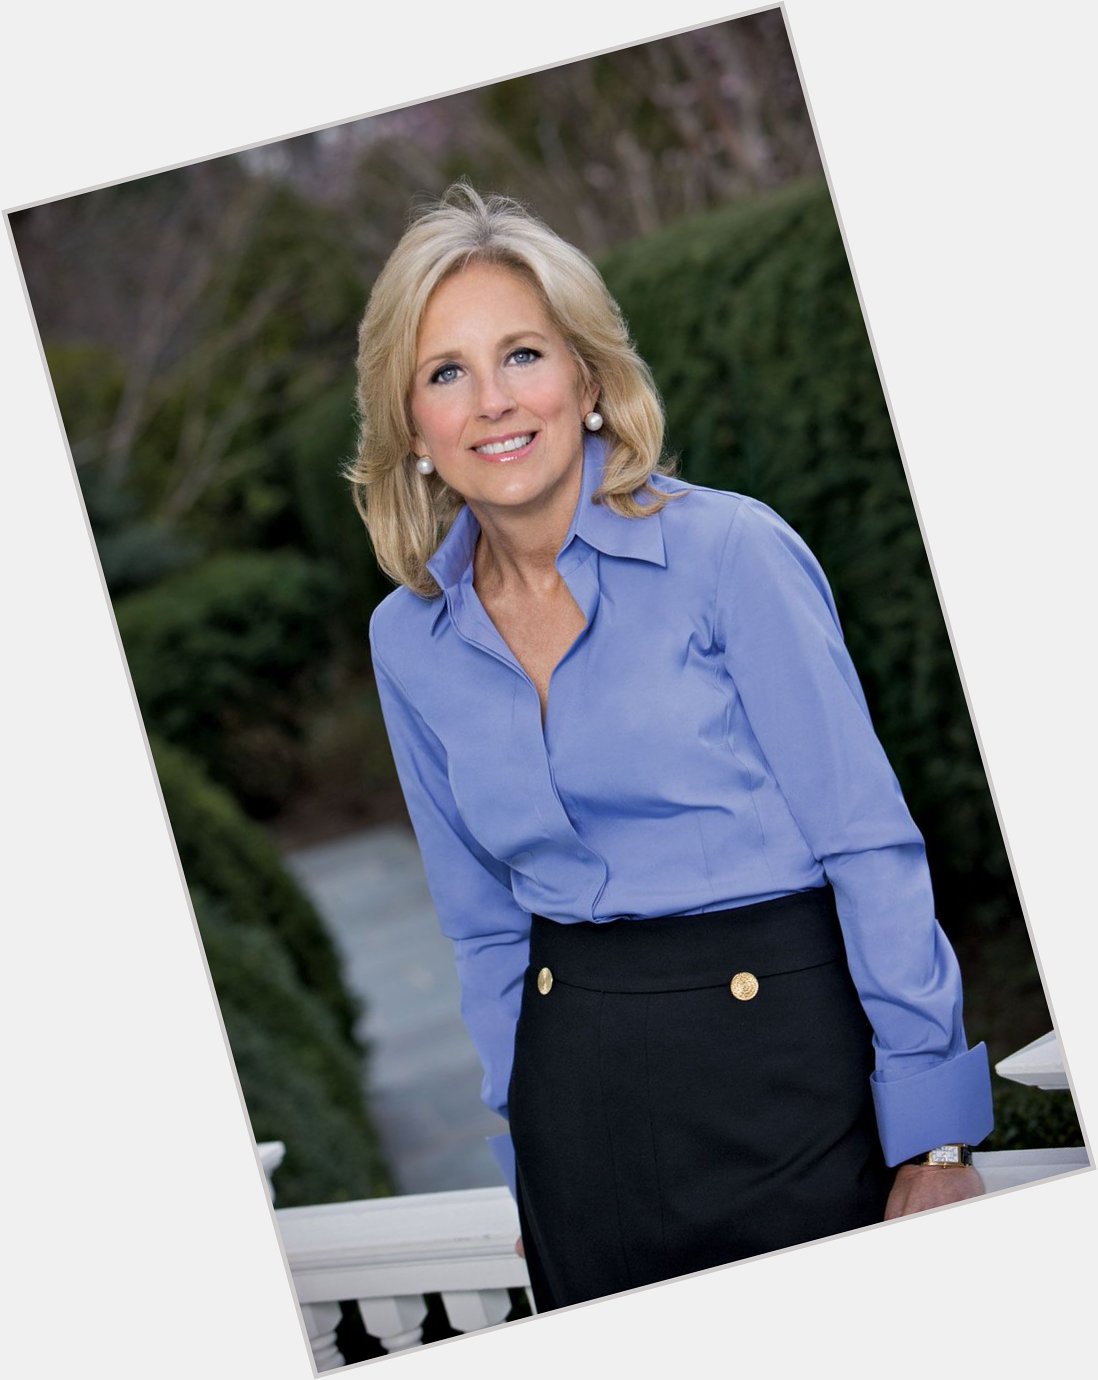 Happy Birthday to our fabulous Dr. Jill Biden. 
Hope you have a lovely day.     